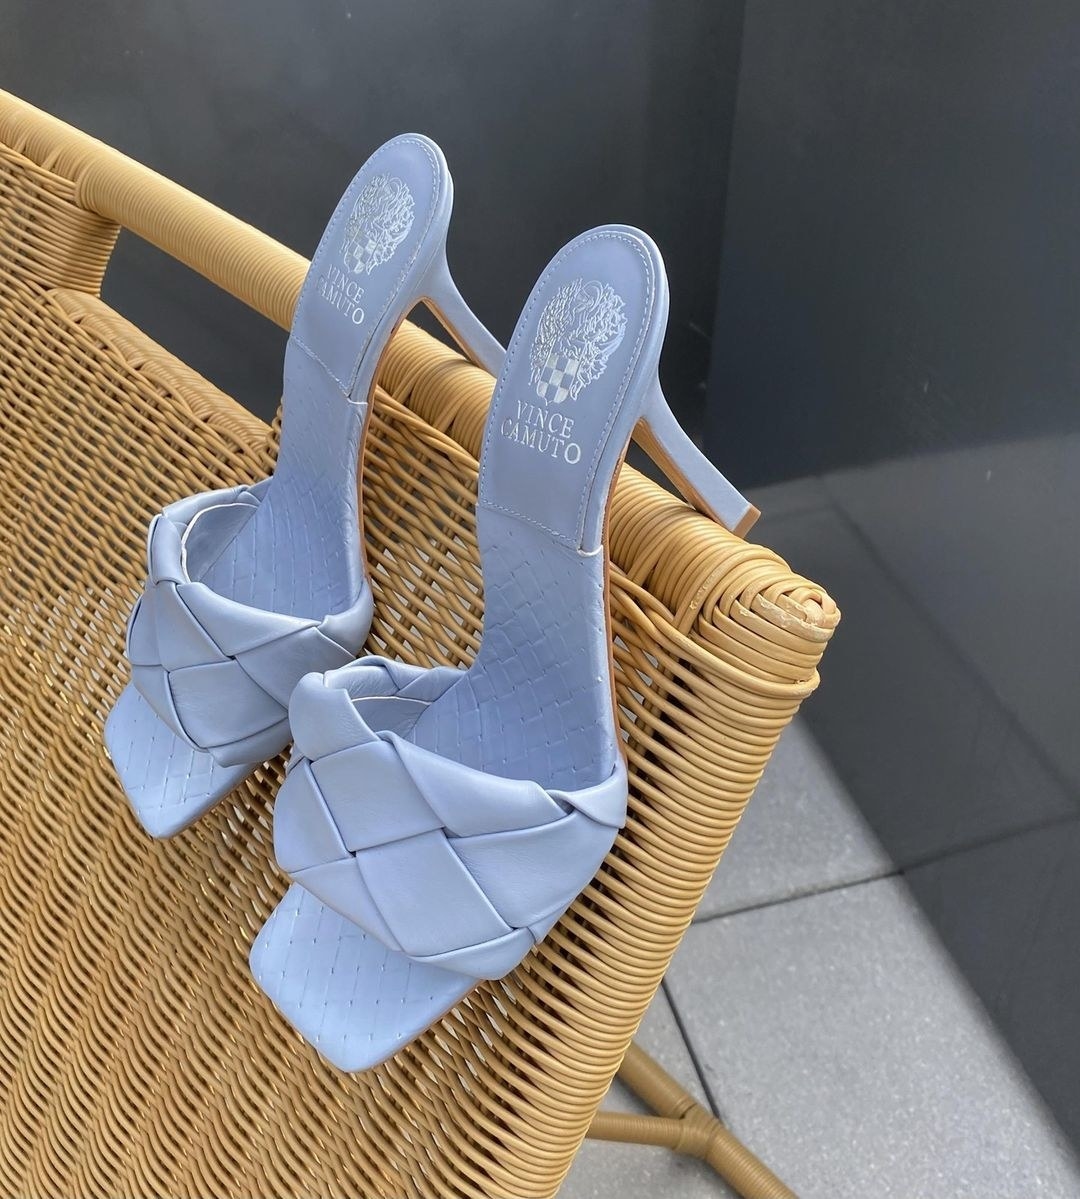 A pair of heeled sandals on the back of a patio chair